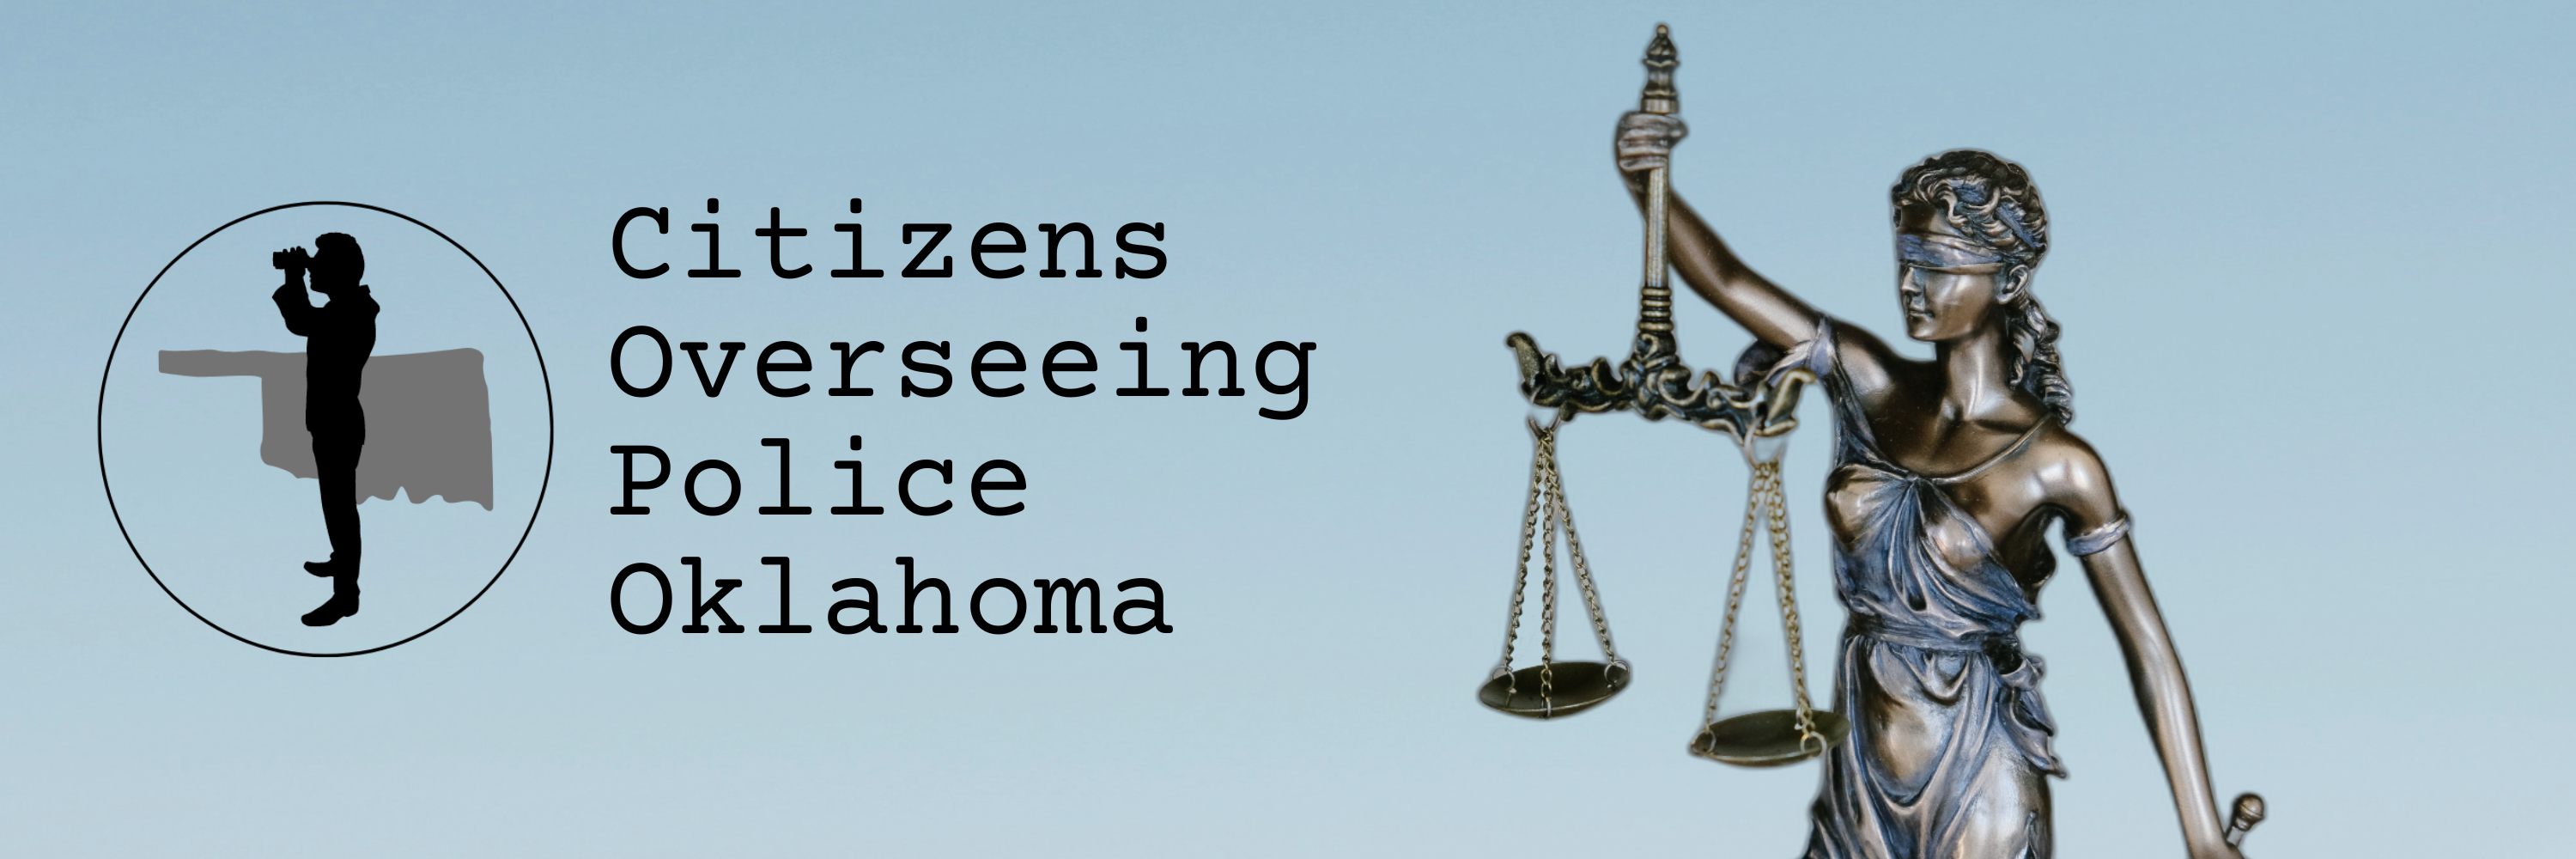 Citizens Overseeing Police Oklahoma